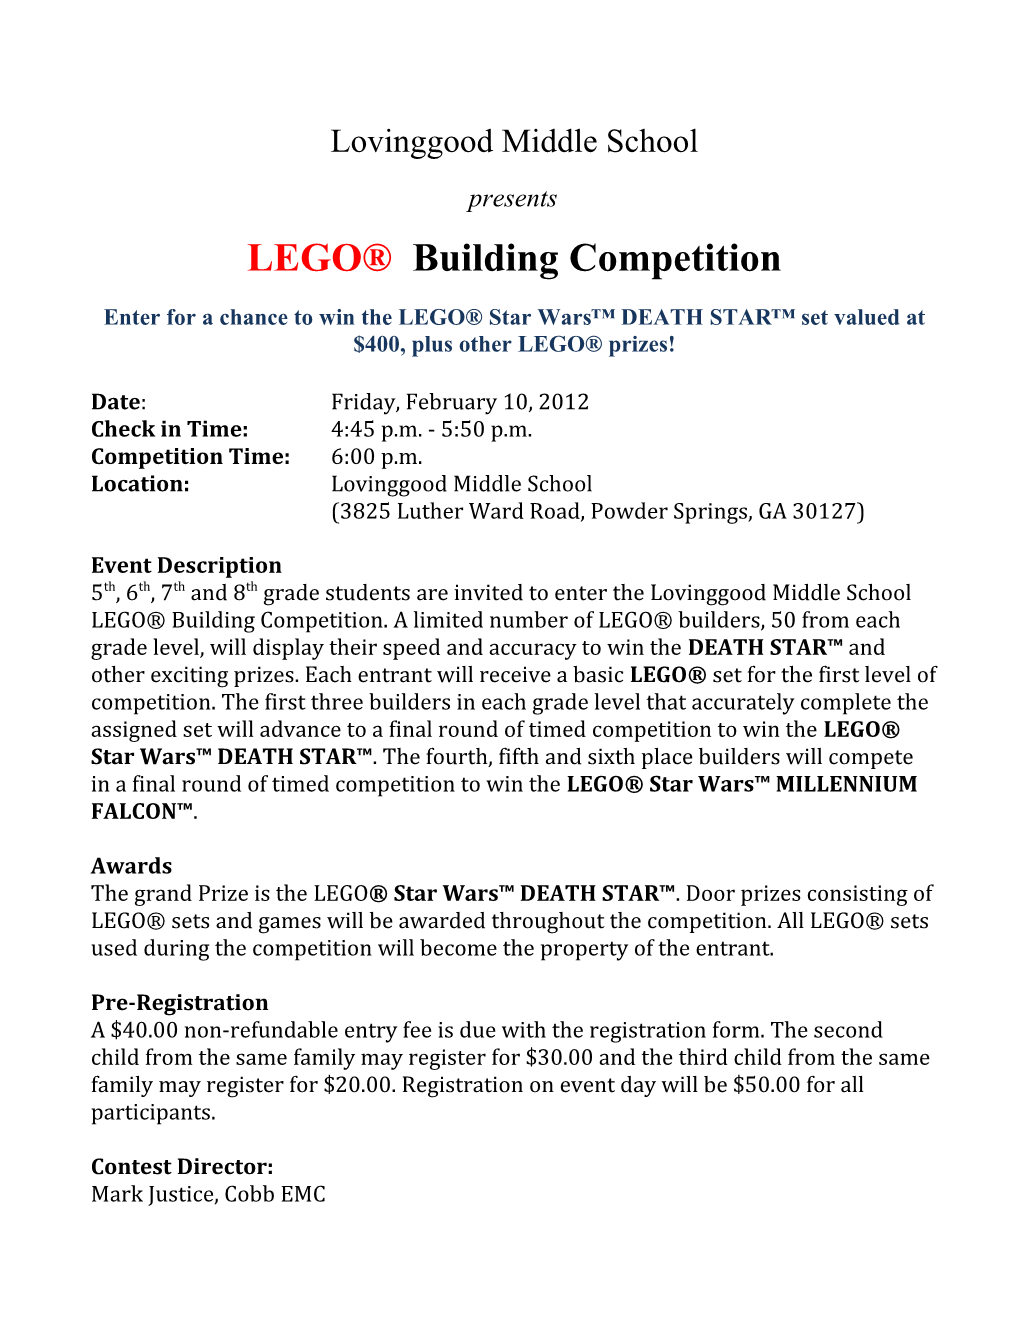 LEGO Building Competition